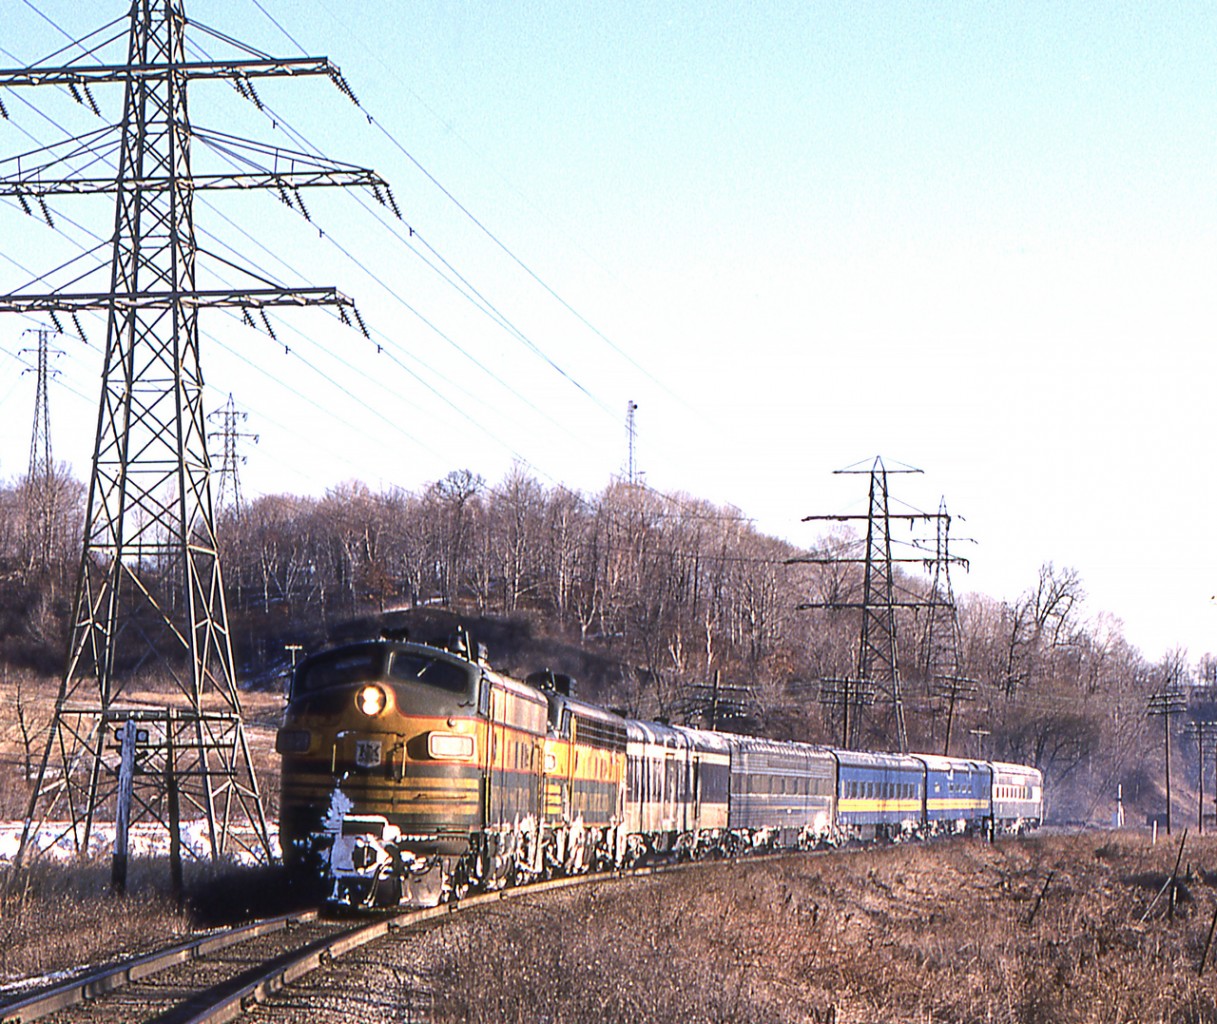 Peter Jobe photographed VIA train #128 headed by Ontario Northland 1521 and Ontario Northland 1509 at Pottery Road in Toronto on March 11, 1980.